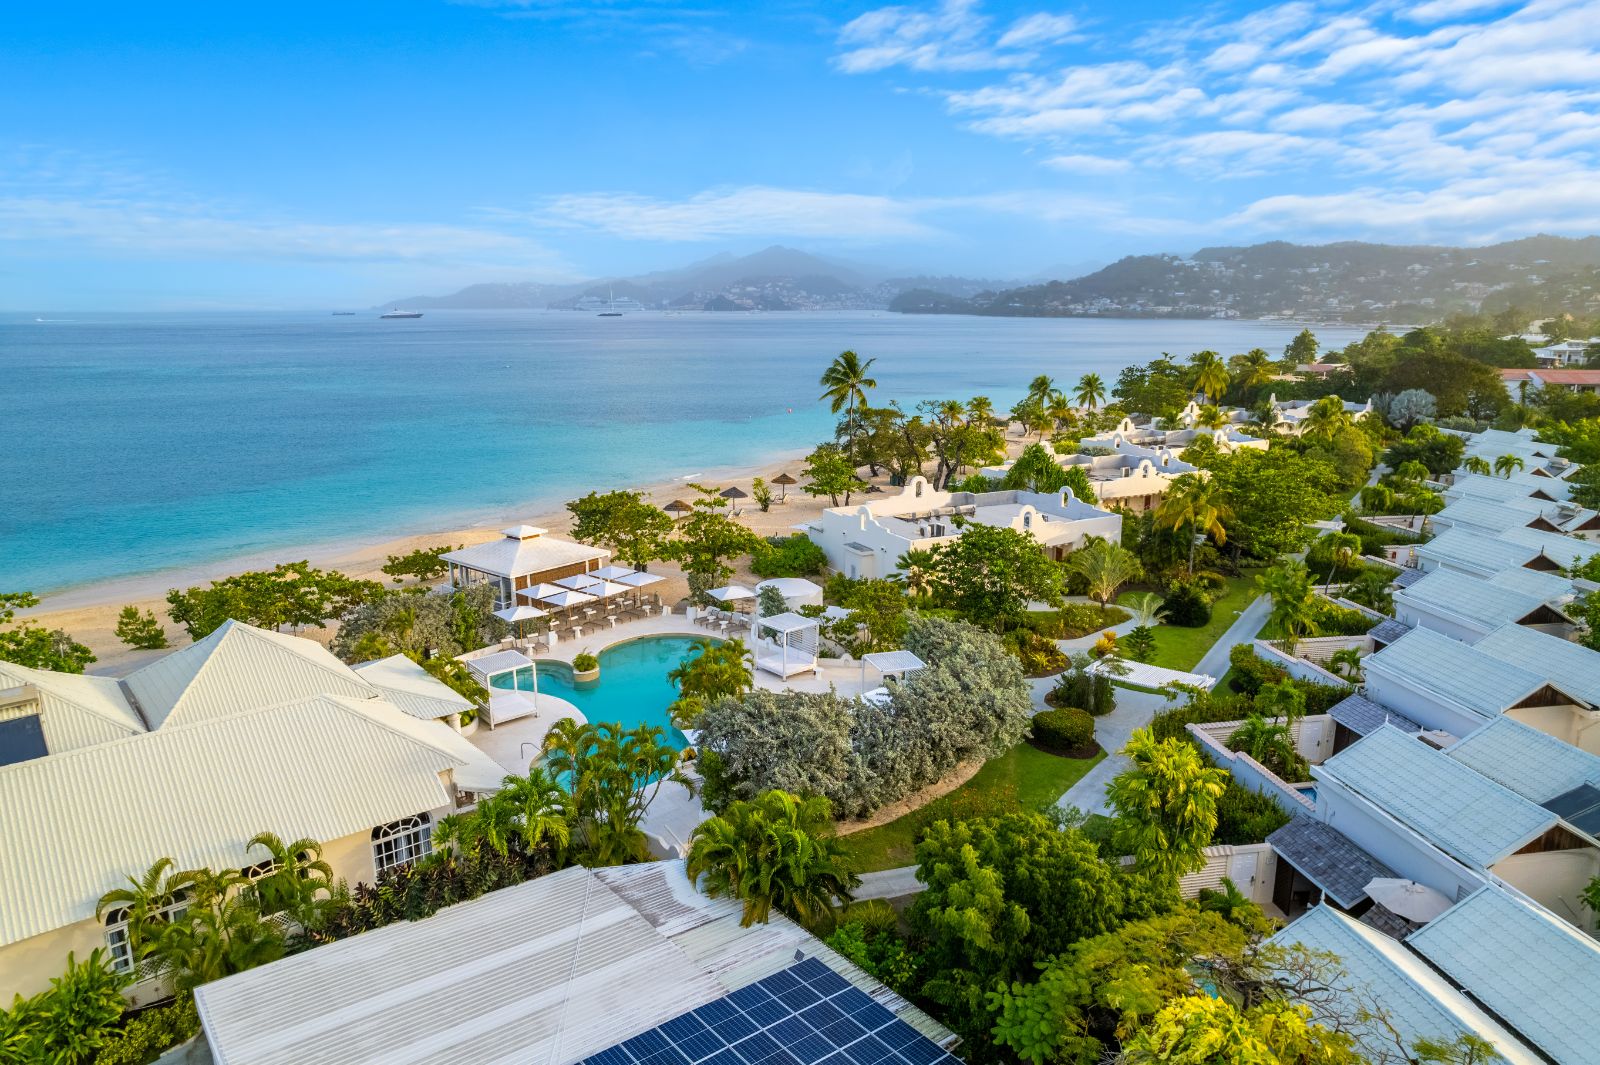 Aerial view of the pool and beach at Spice Island Beach Resort in Grenada